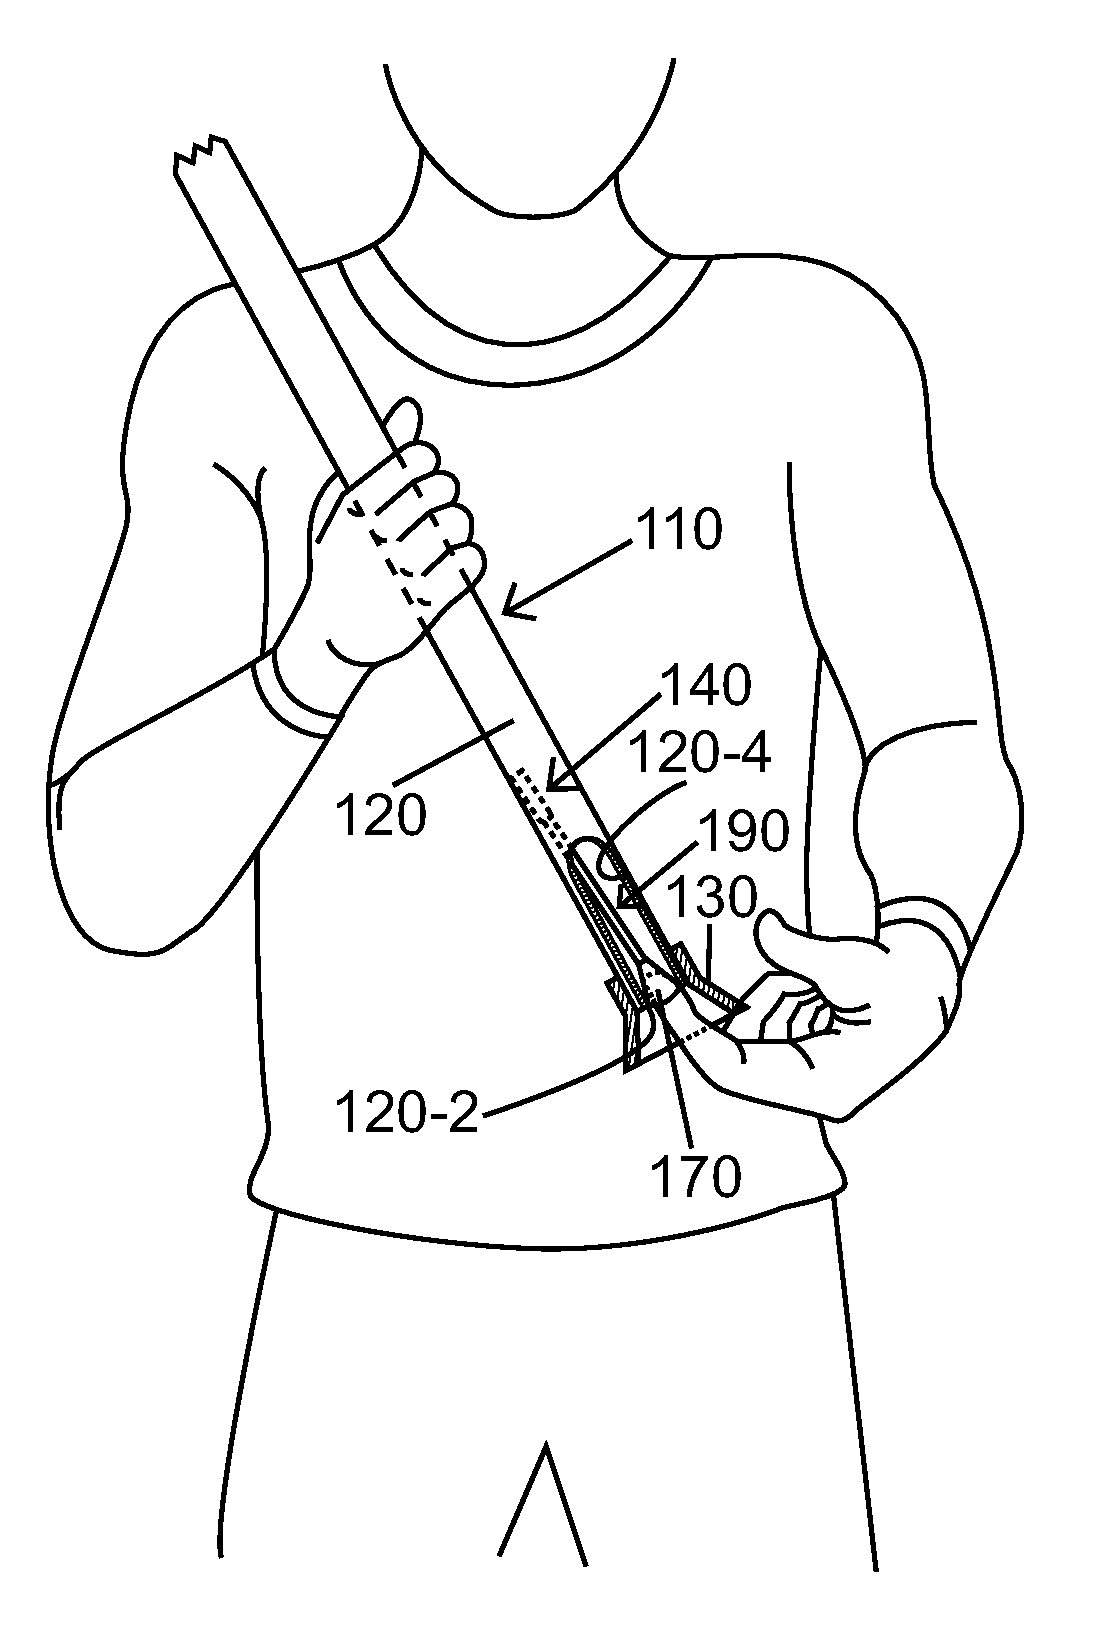 Apparatus for launching subcaliber projectiles at propellant operating pressures including the range of pressures that may be supplied by human breath